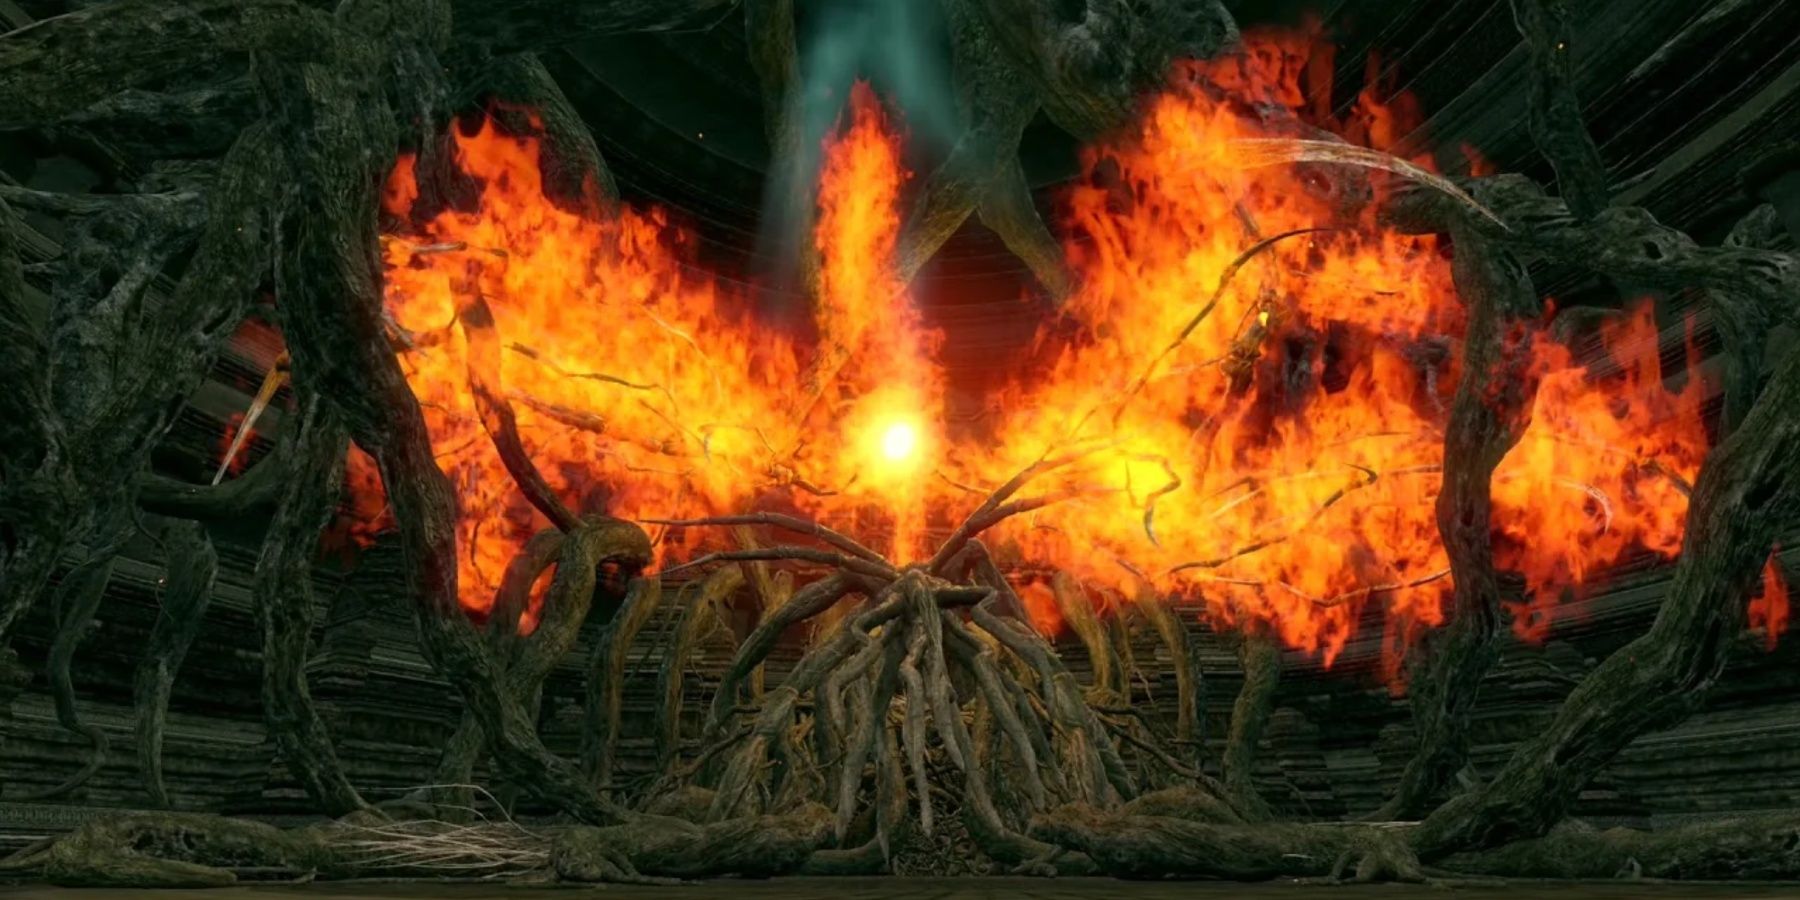 Dark Souls Bed of Chaos fire sprouting from the wooden body